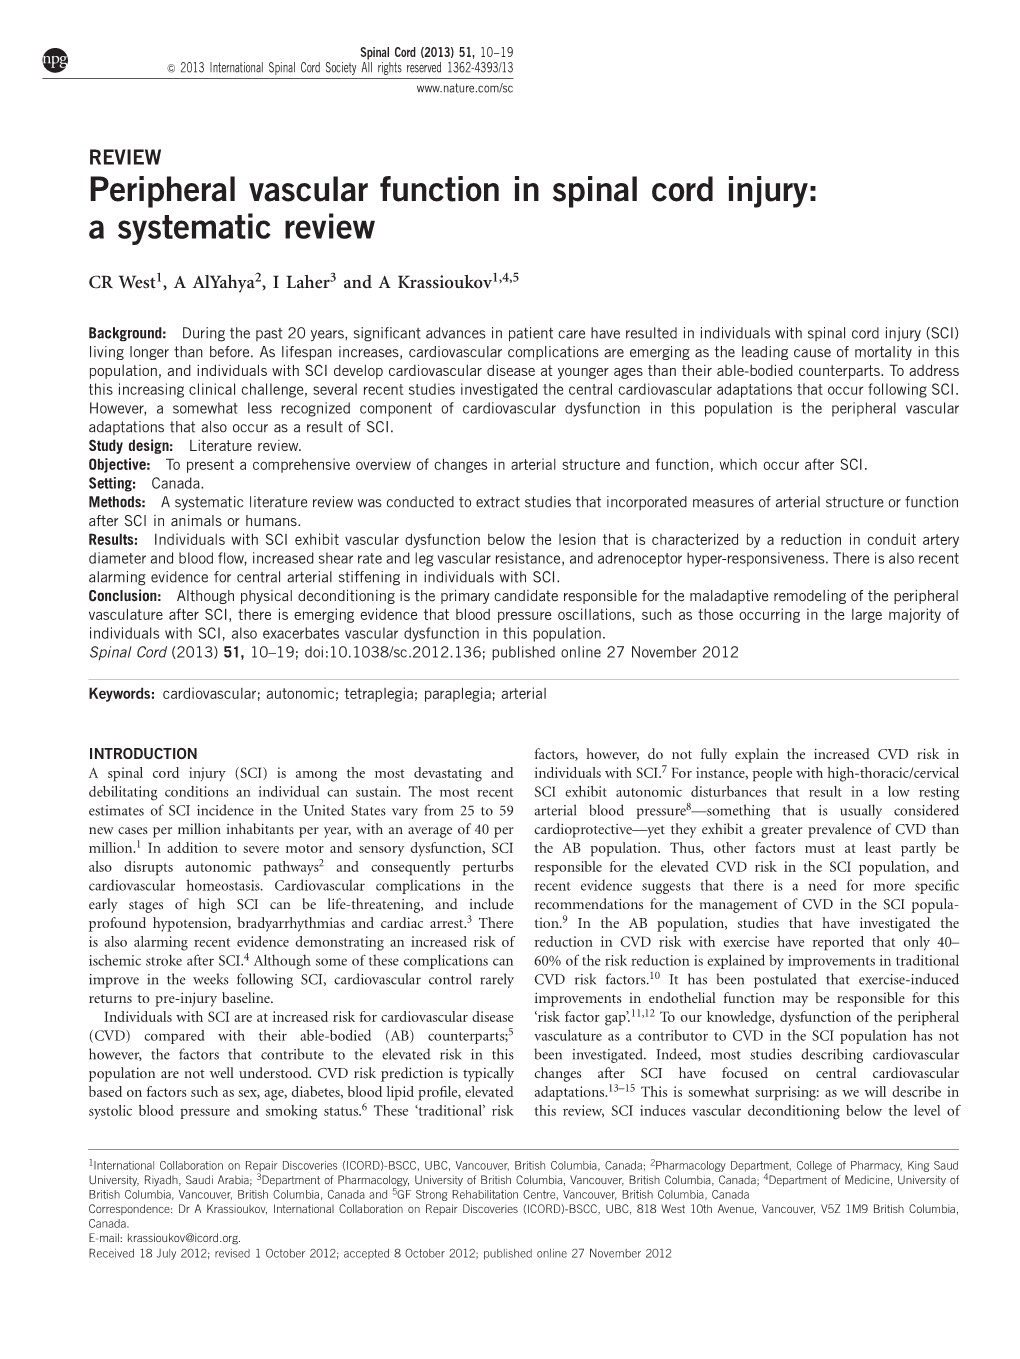 Peripheral Vascular Function in Spinal Cord Injury: a Systematic Review